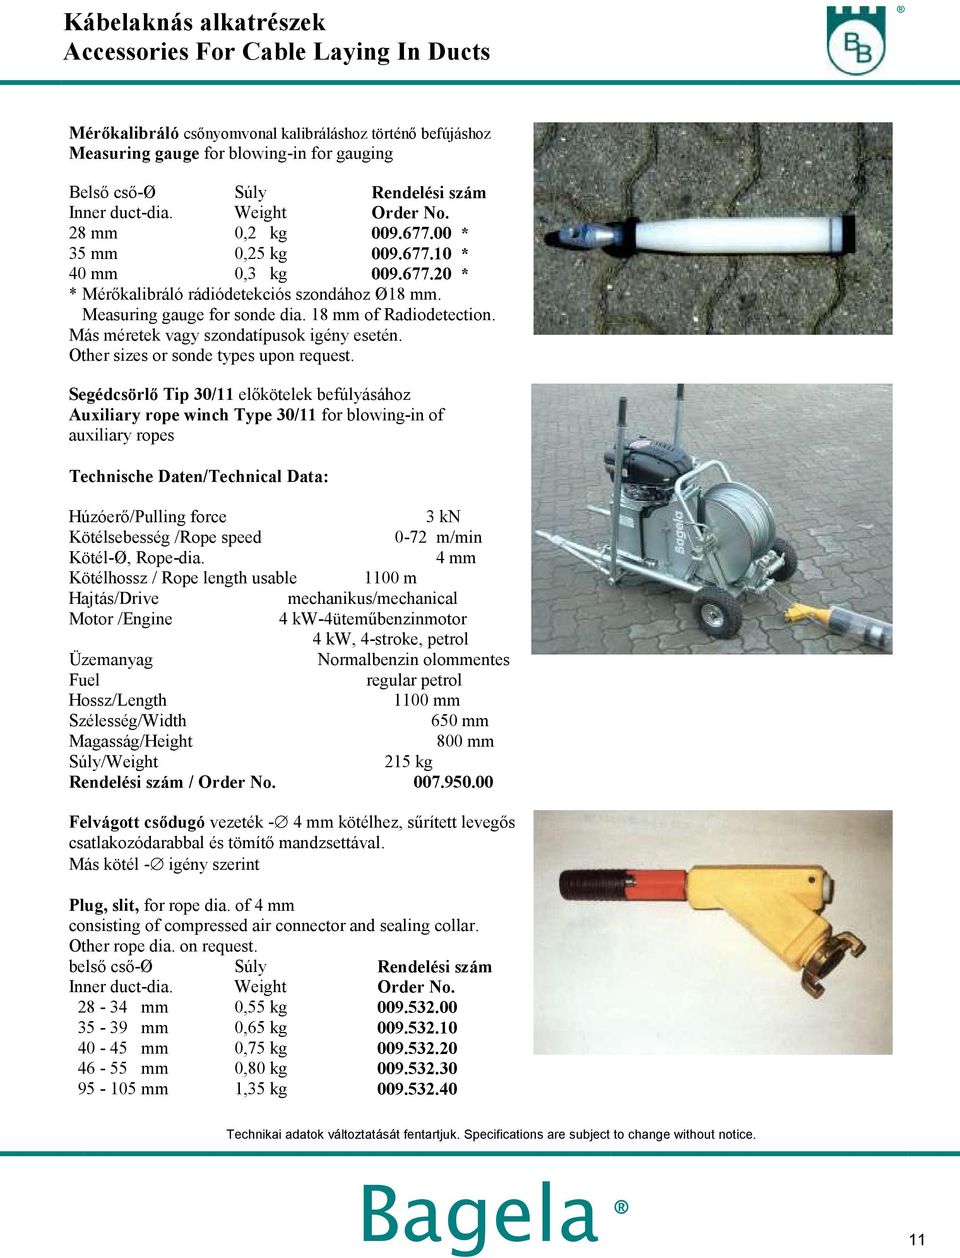 Other sizes or sonde types upon request.